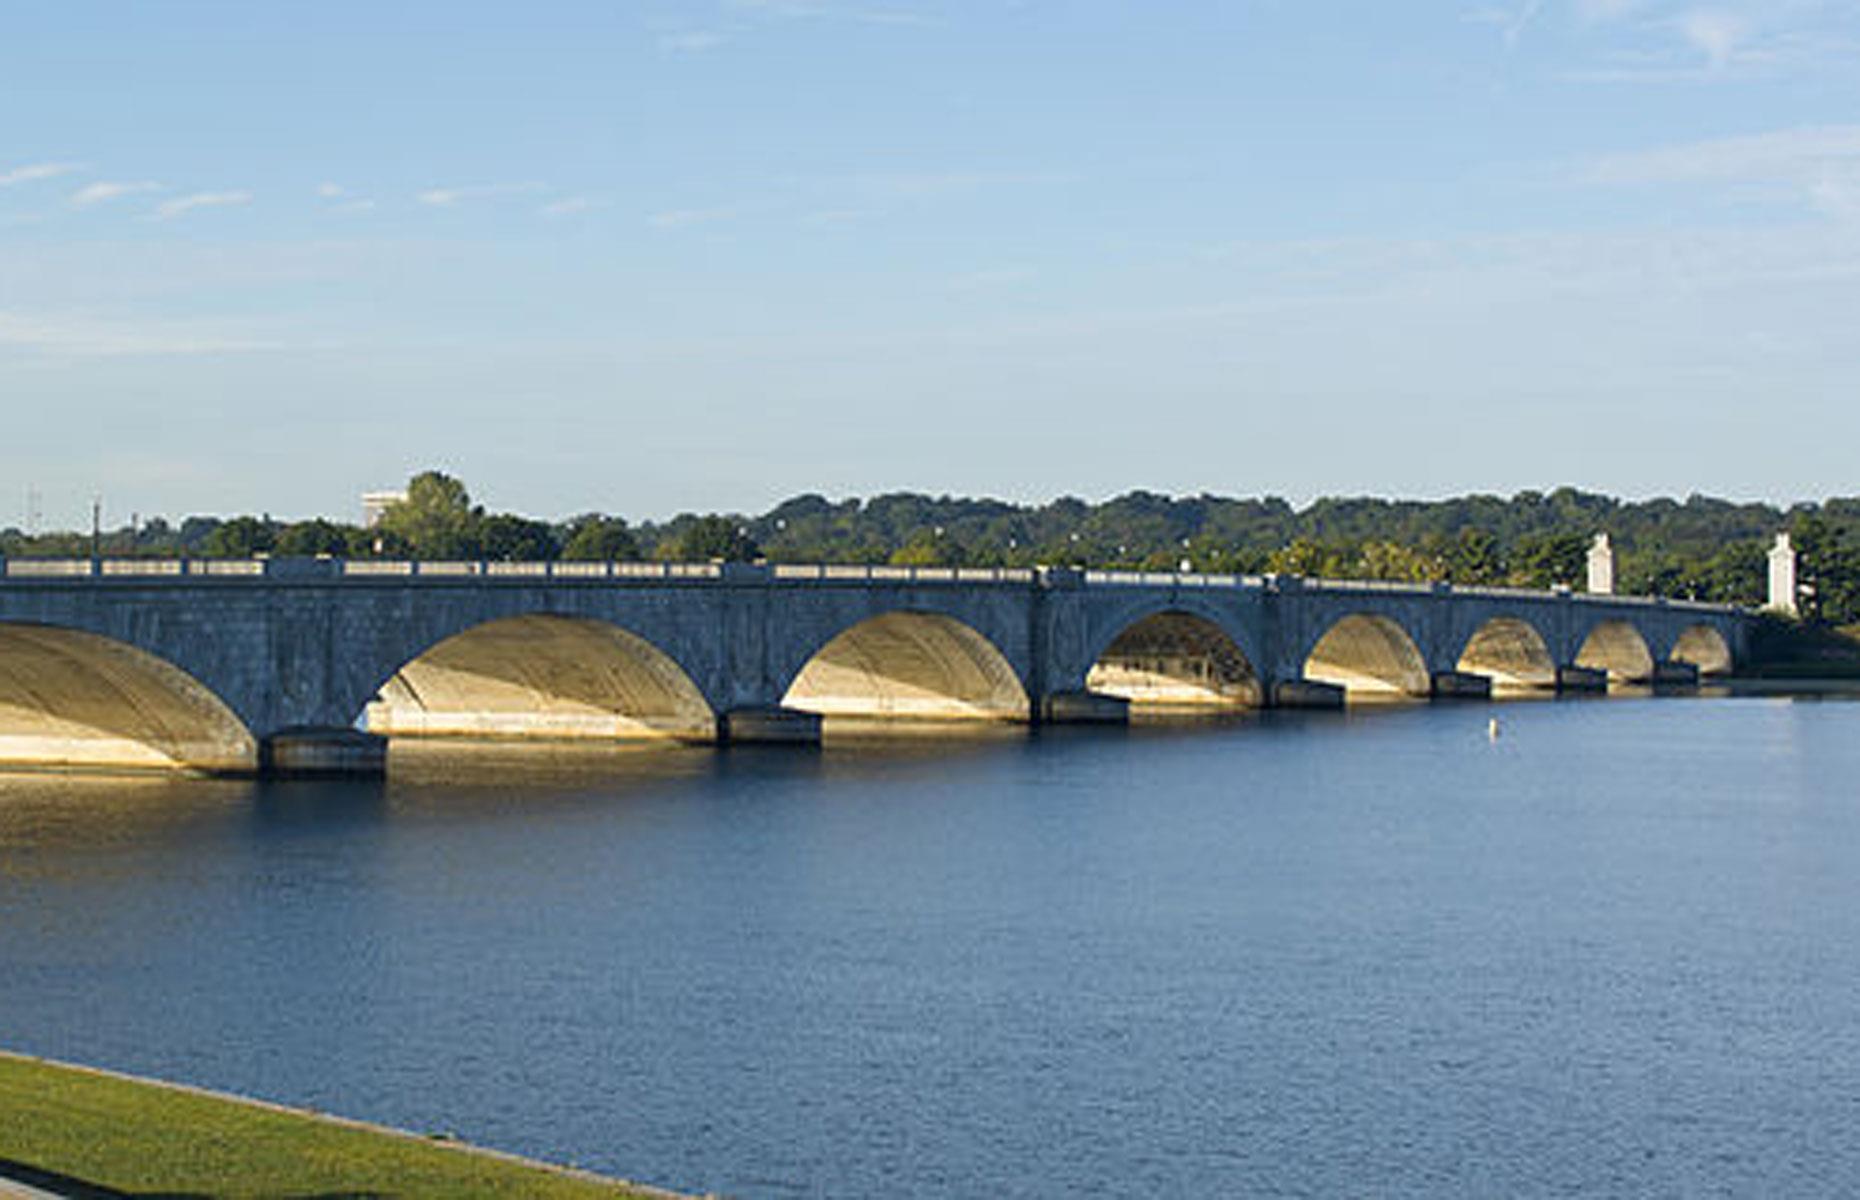 Staying in DC, a crossing over the Potomac River to memorialize America's fallen was in the pipeline for decades before Congress finally approved the Neoclassical bridge by architectural firm McKim, Mead, and White, and the Arlington Memorial Bridge was completed in 1932.